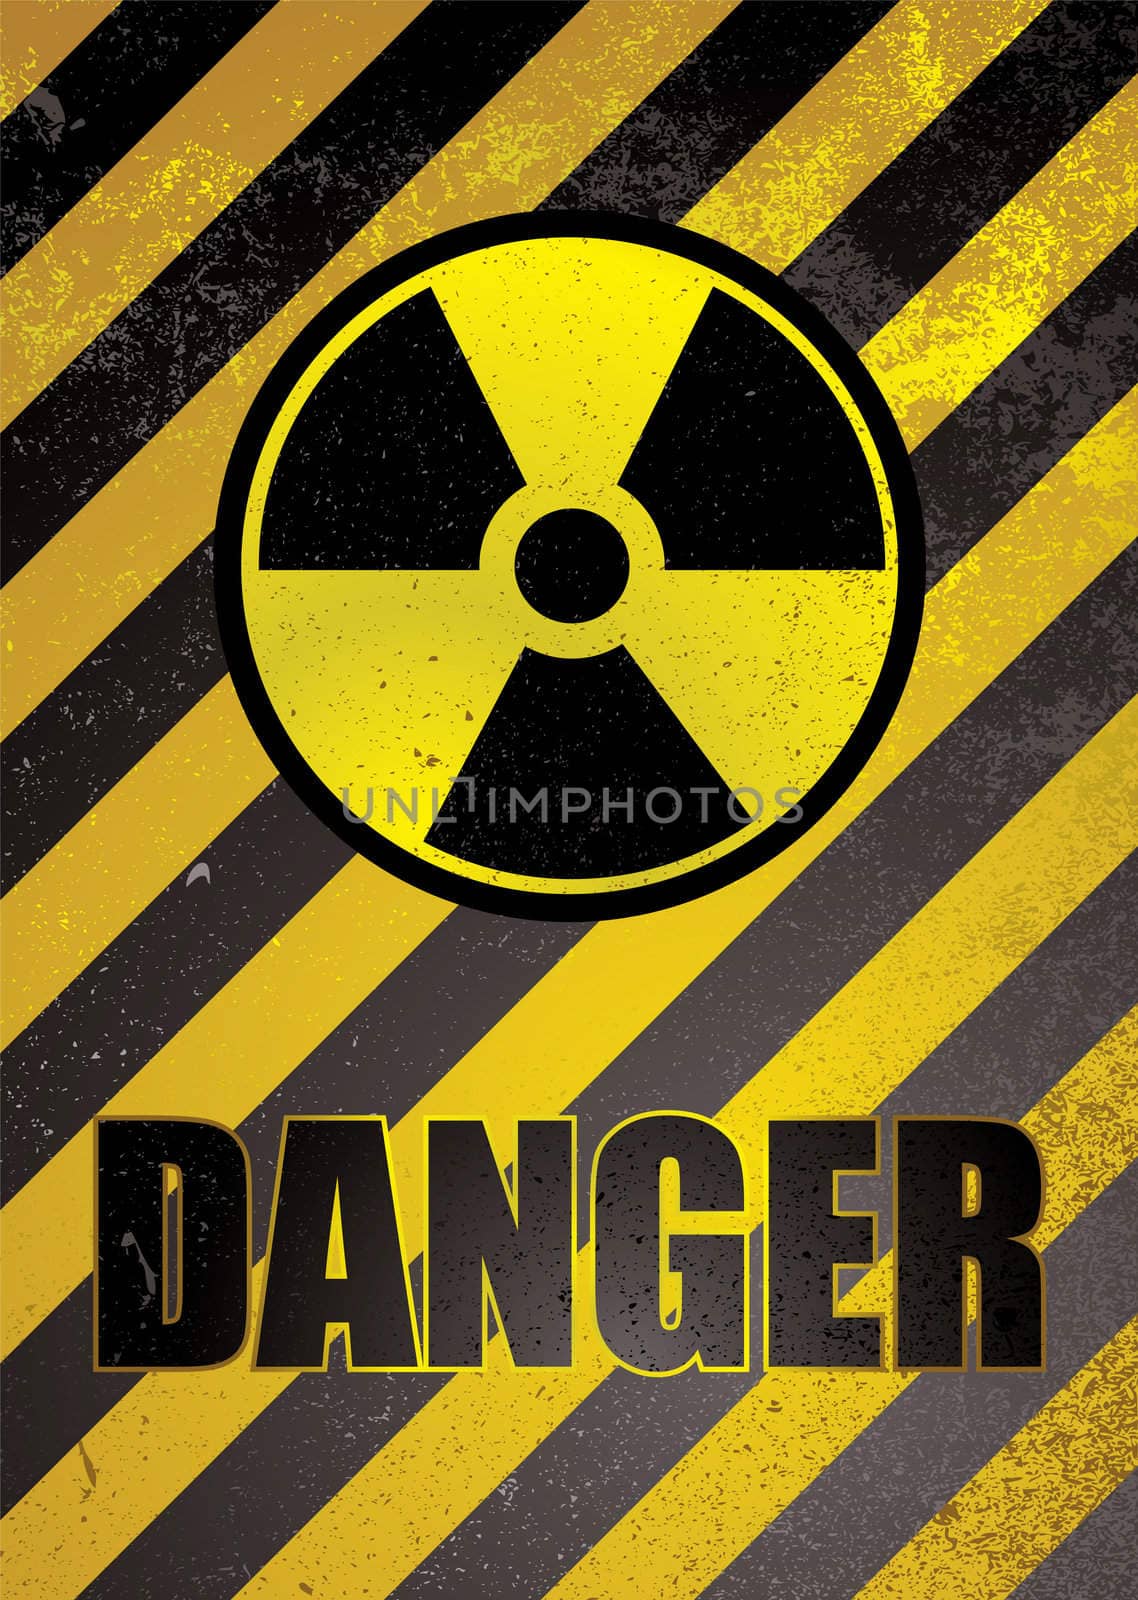 Warning poster in yellow and black stripes with nuclear image